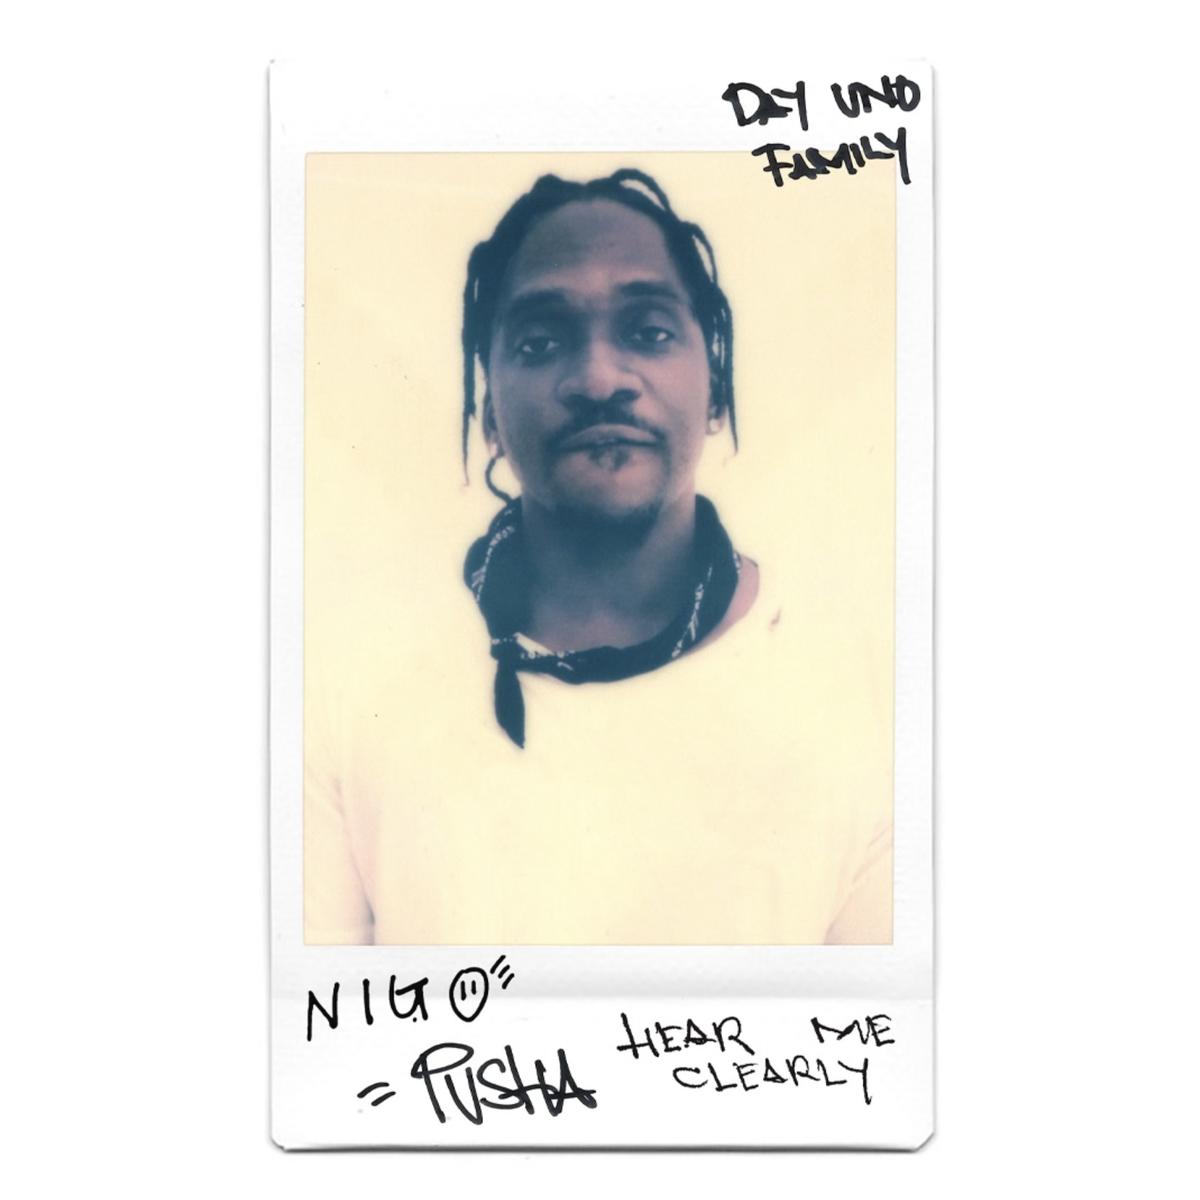 Nigo Calls On Pusha-T For “Hear Me Clearly”